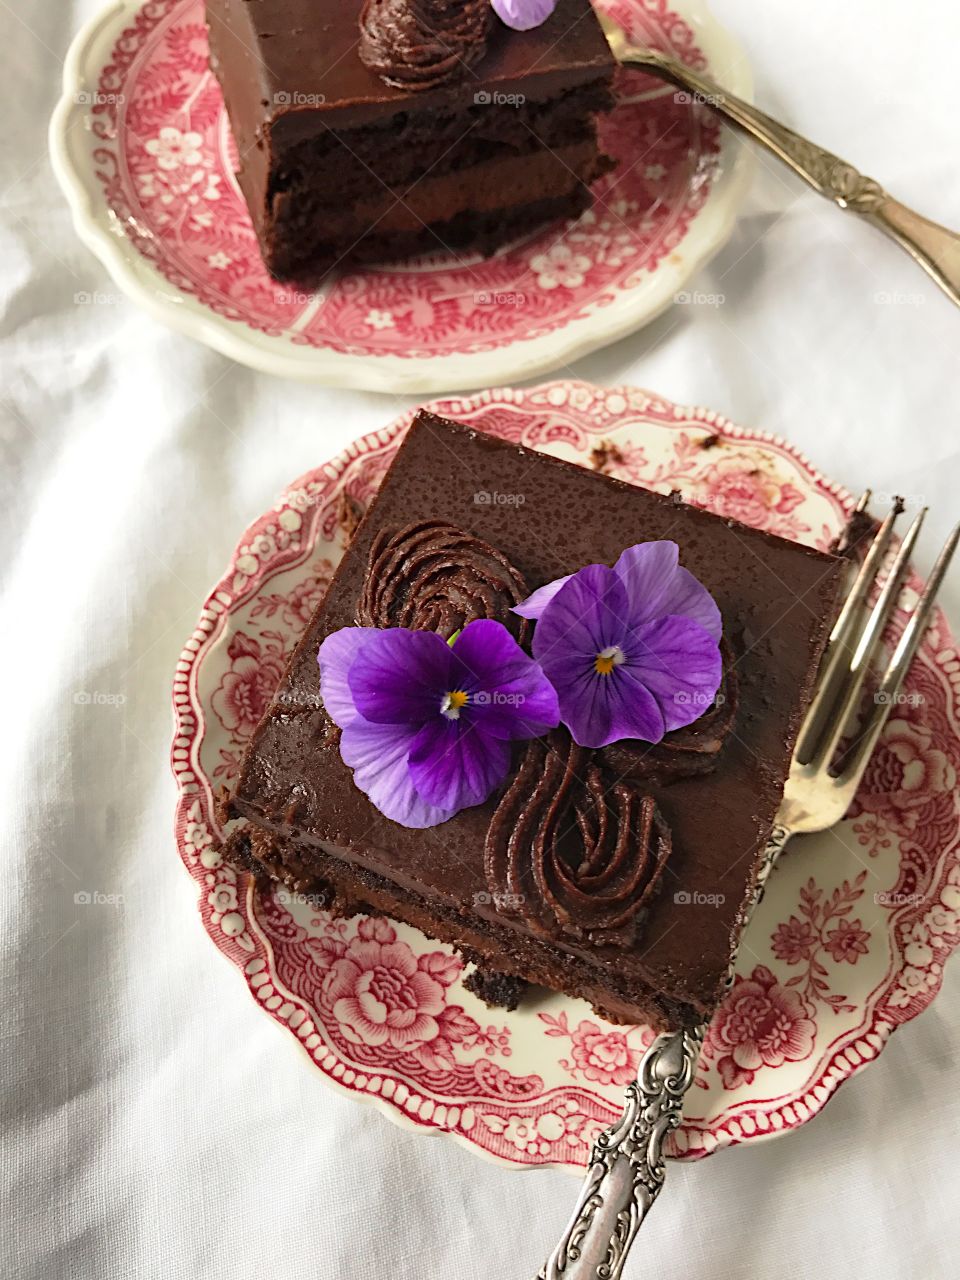 Servings of chocolate cake with pansies